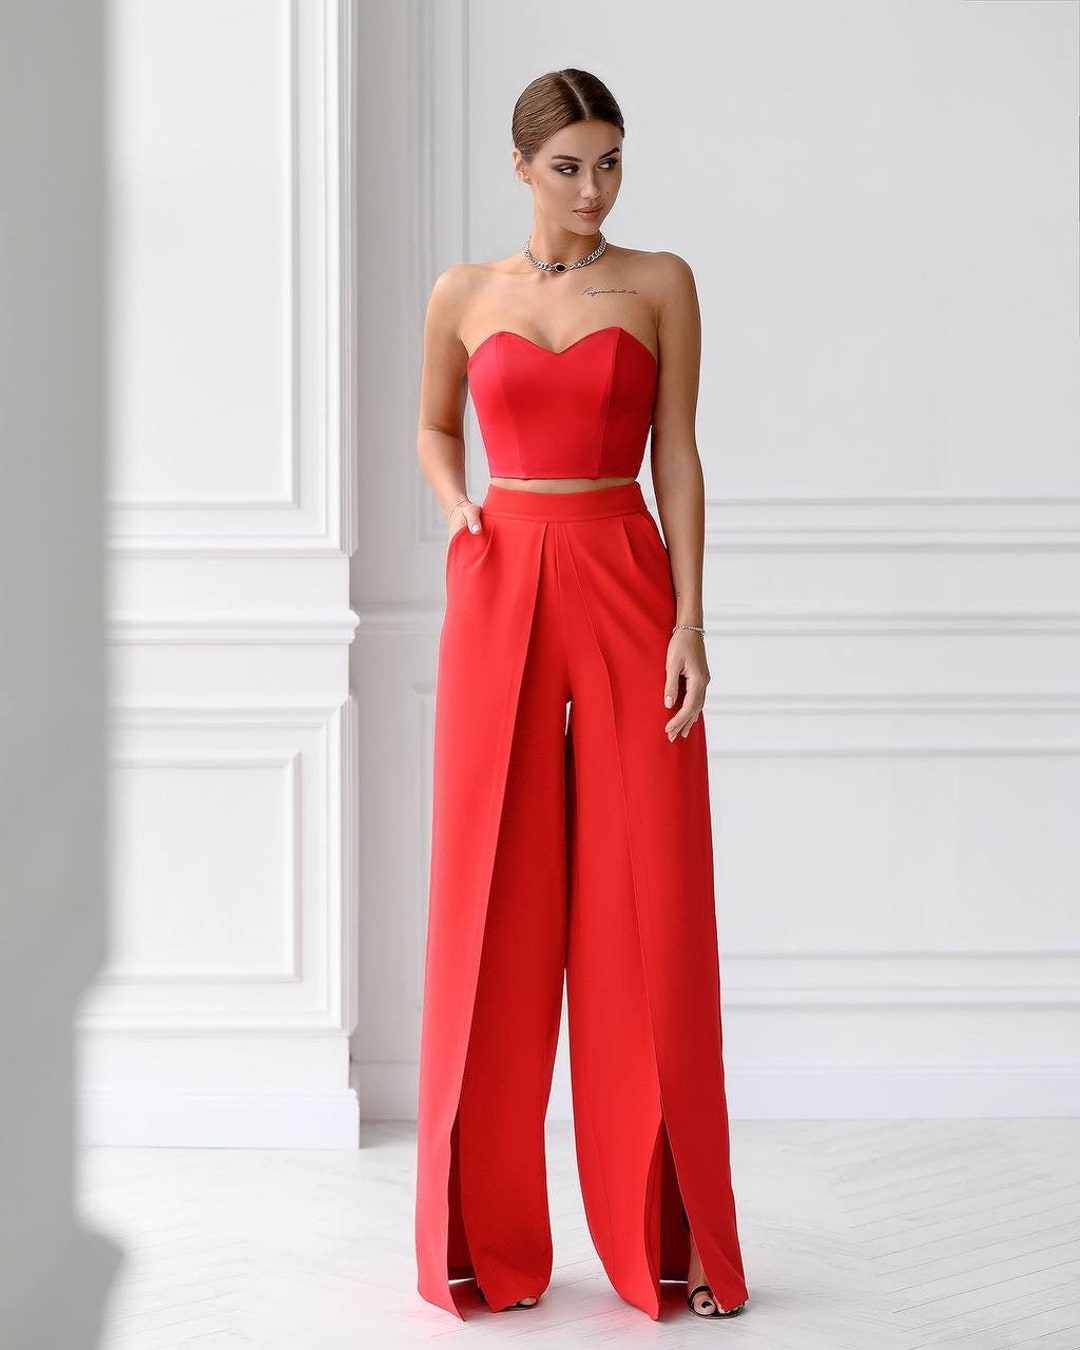 Red Wide Leg Pants With High Front Slit, Red High Waist Palazzo